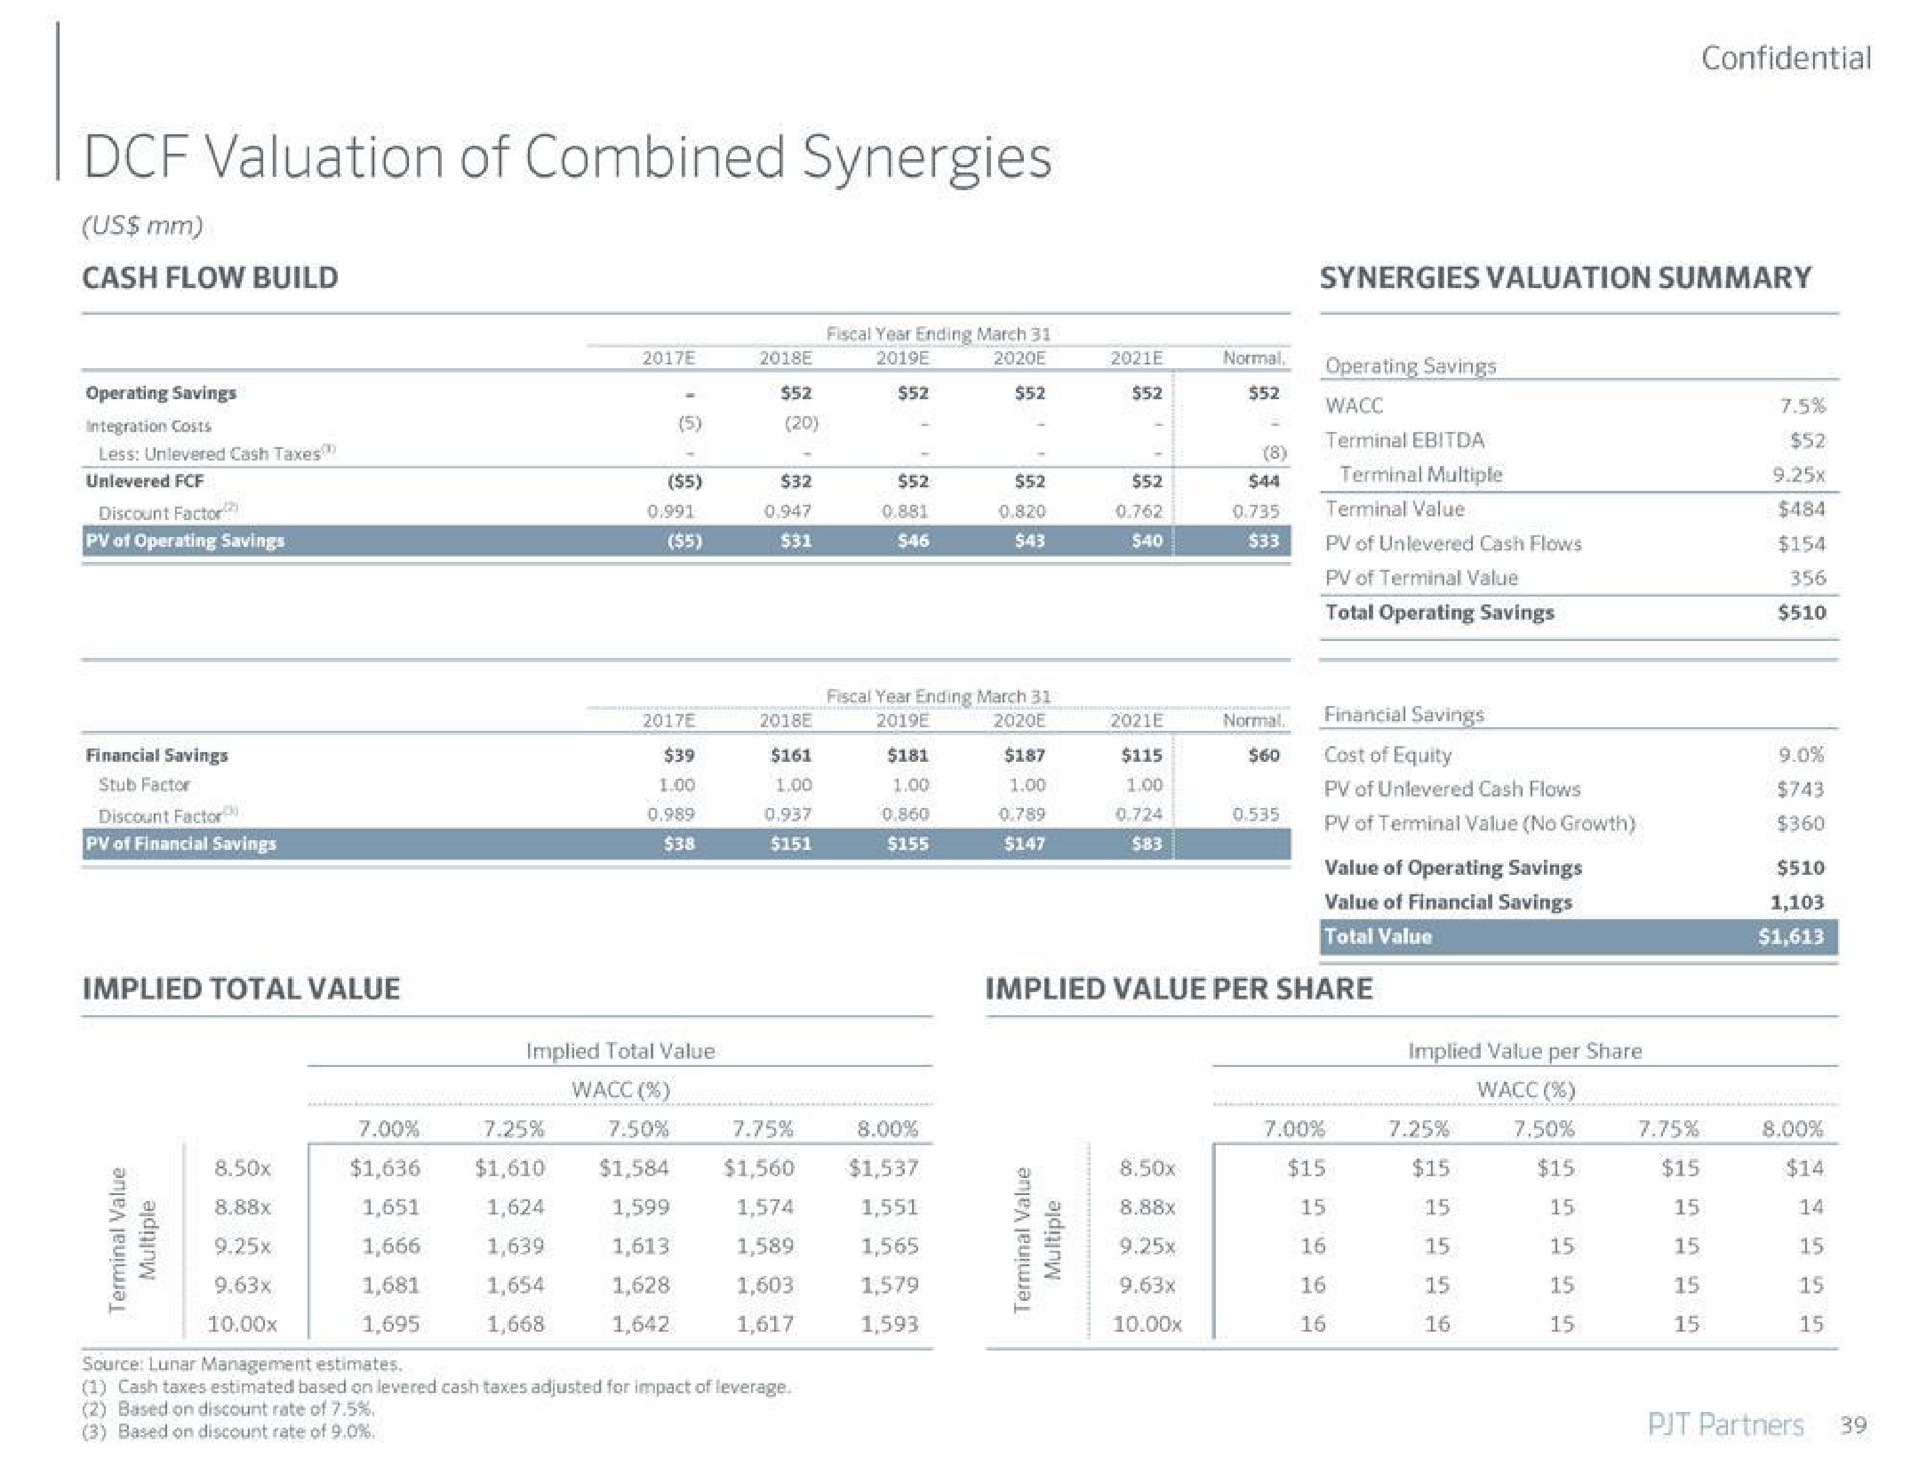 valuation of combined synergies | PJT Partners